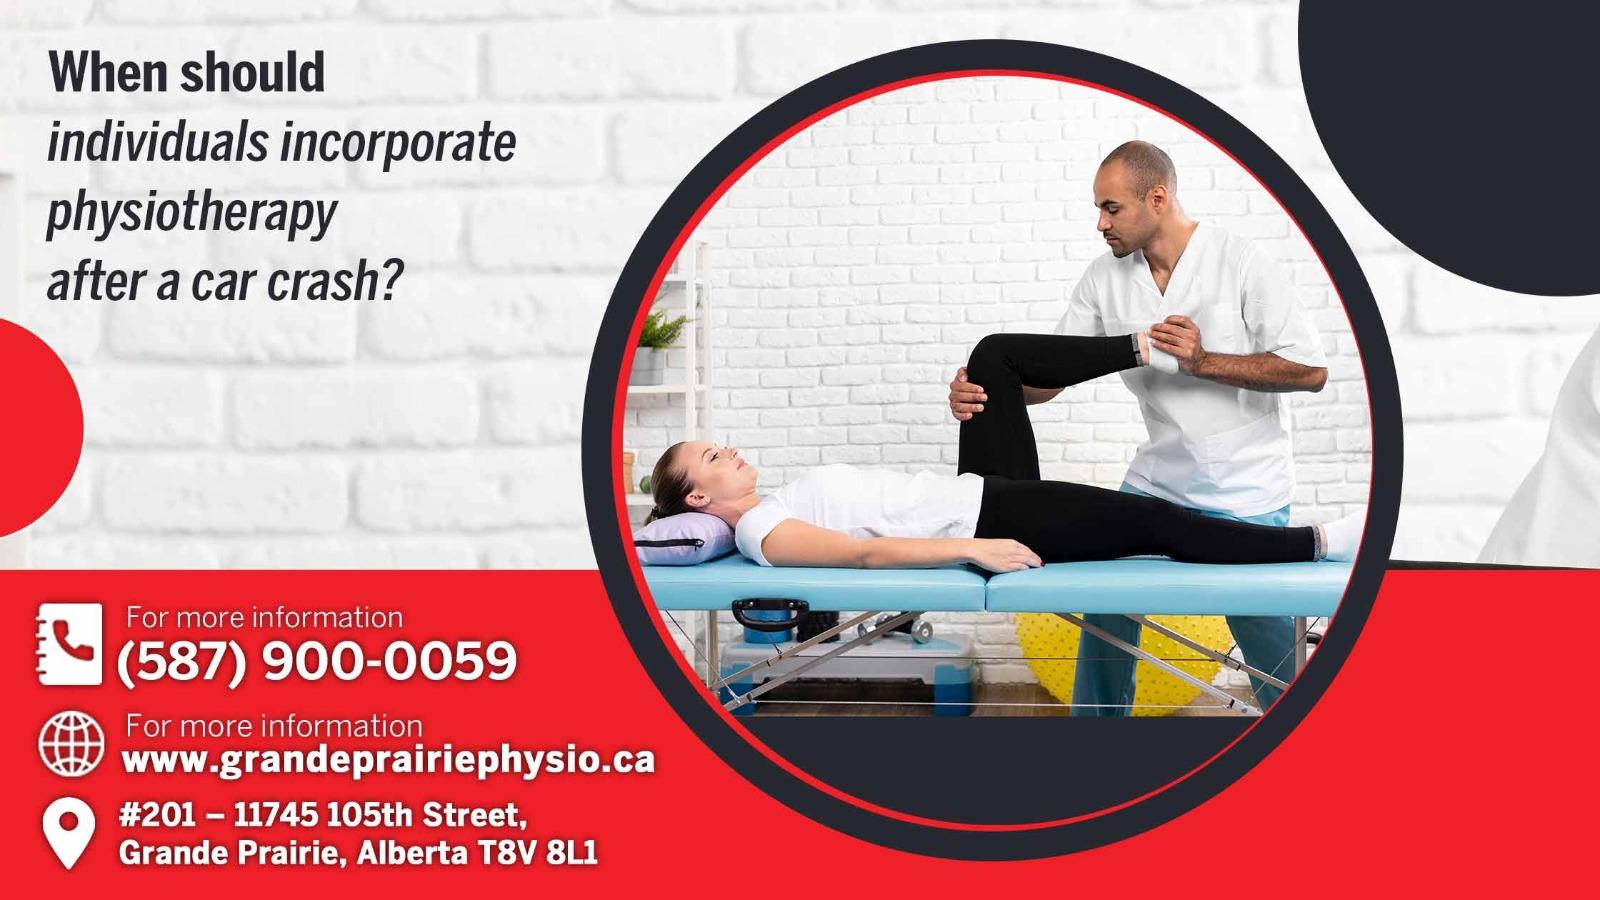 When should individuals incorporate physiotherapy after a car crash